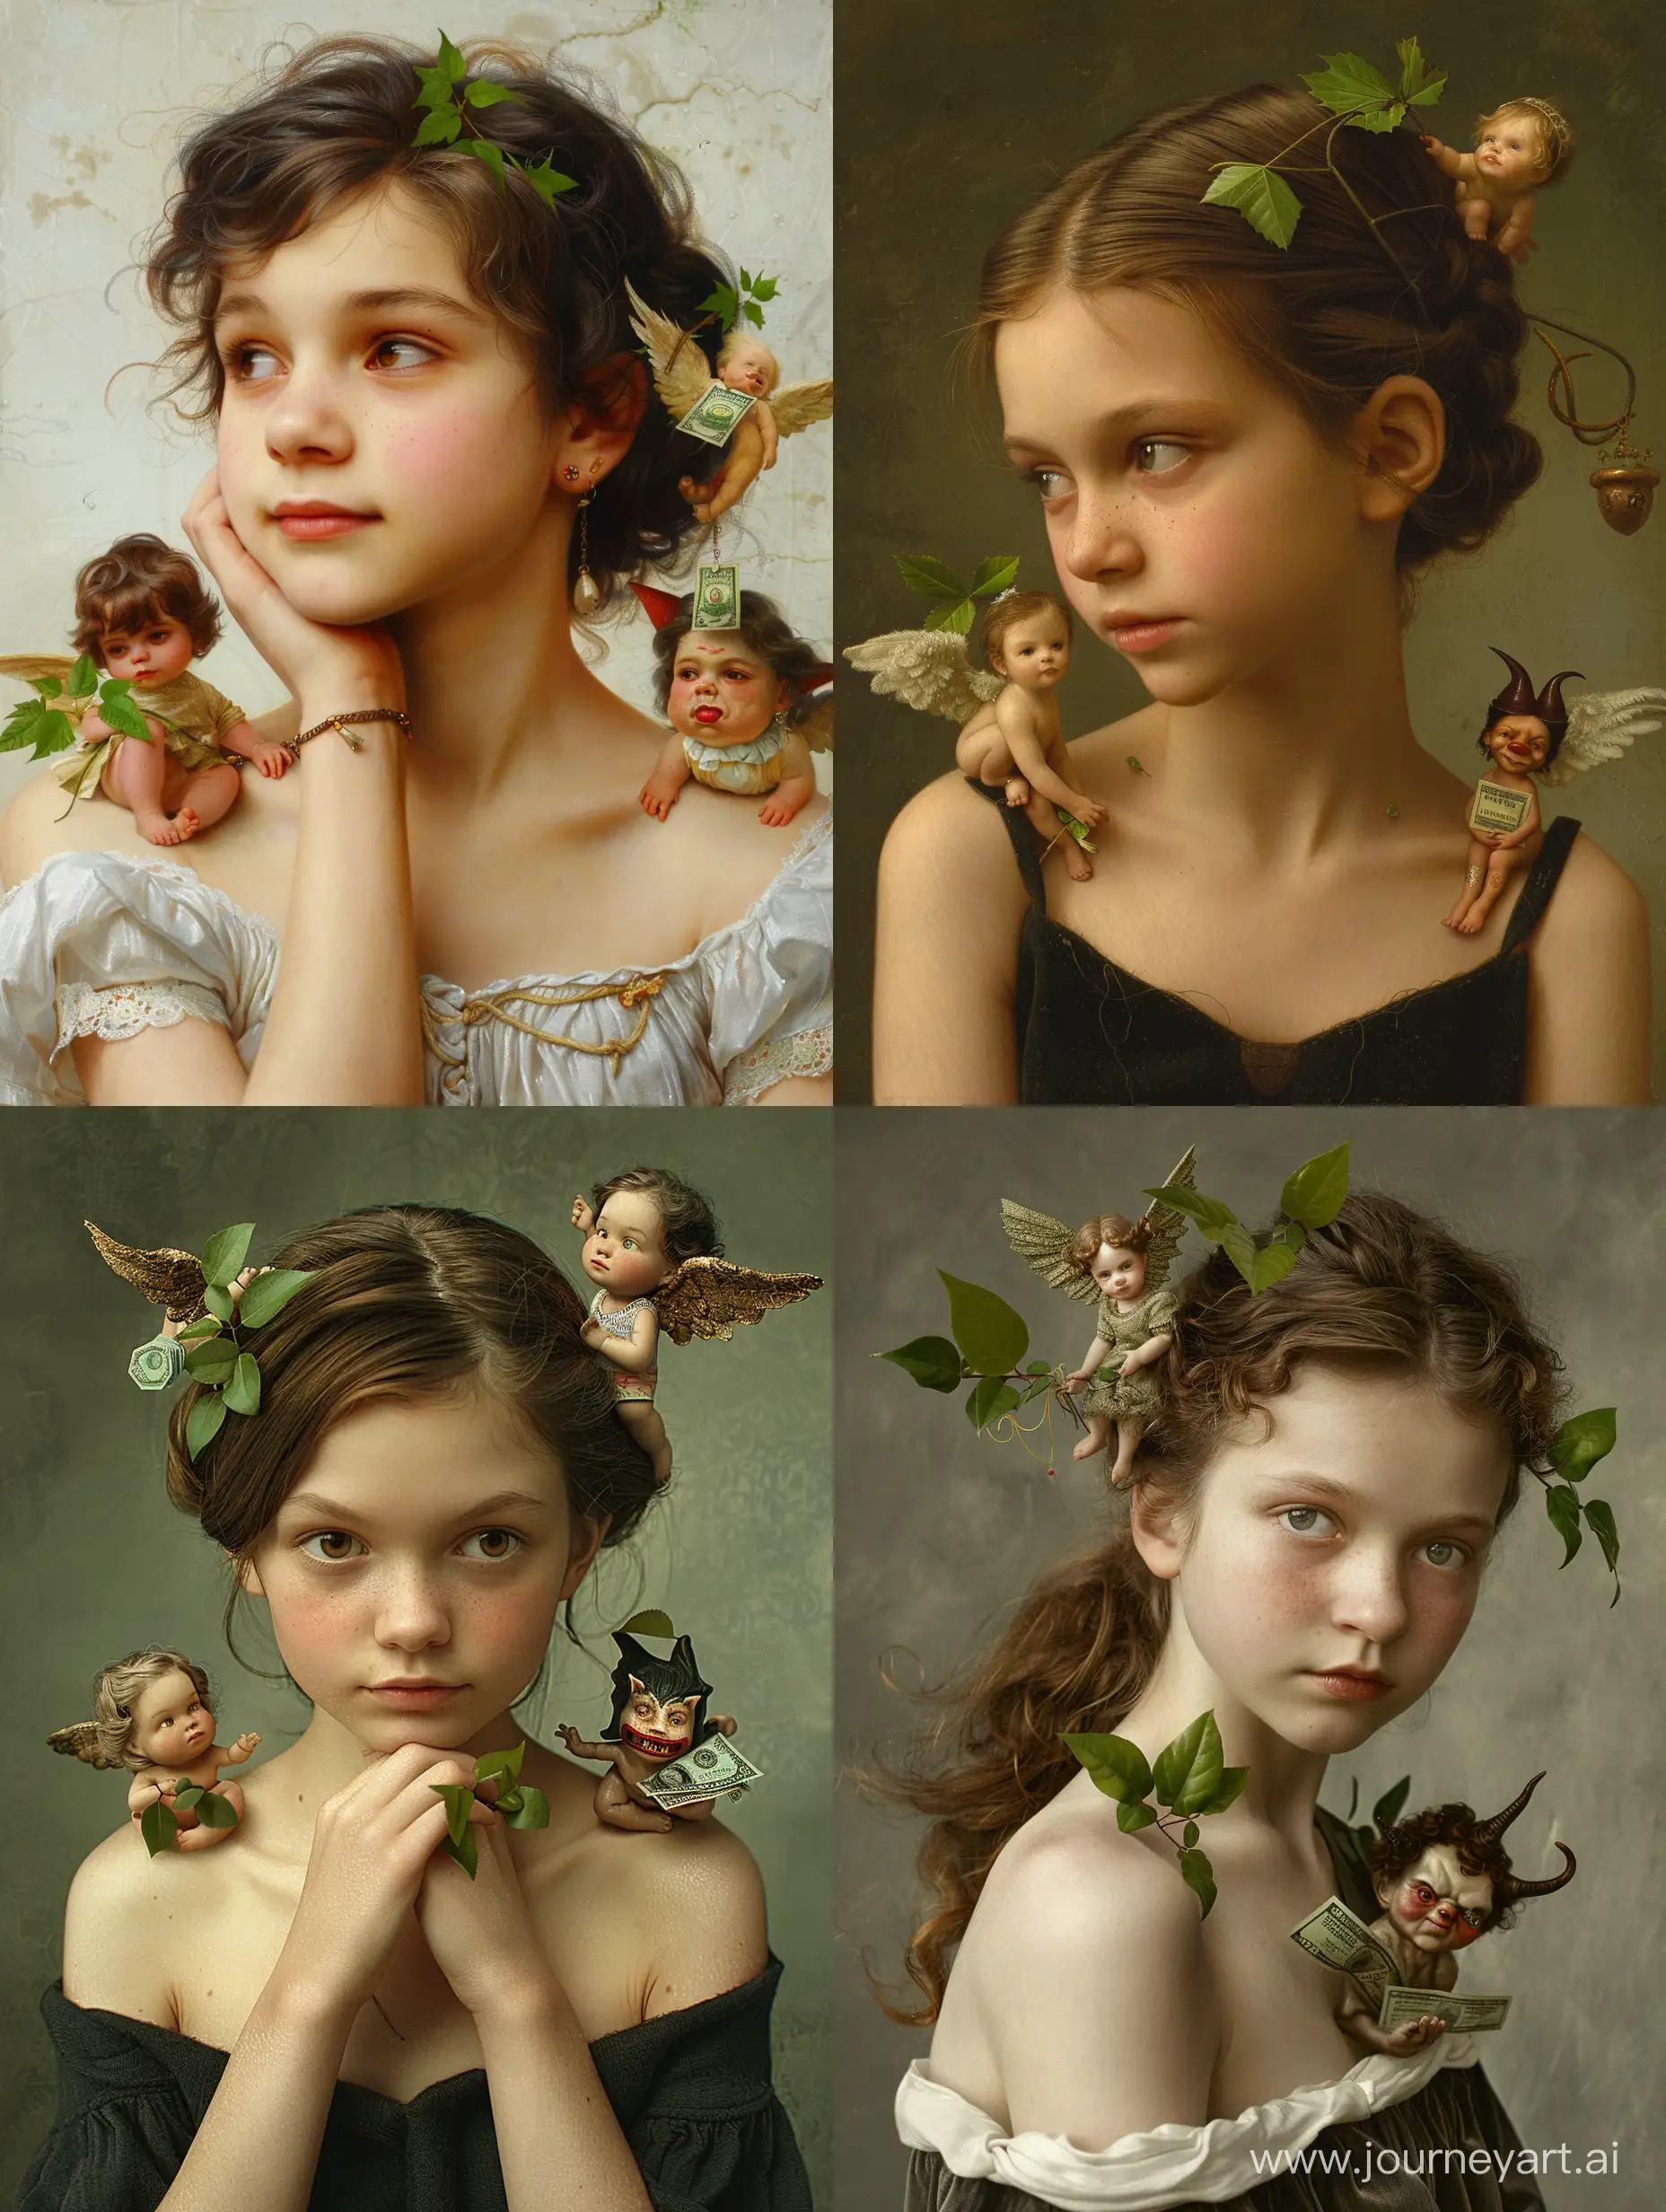 A young woman looking thoughtful, with a small angel holding green leaves sitting one shoulder, and a small devil holding money on the other shoulder.